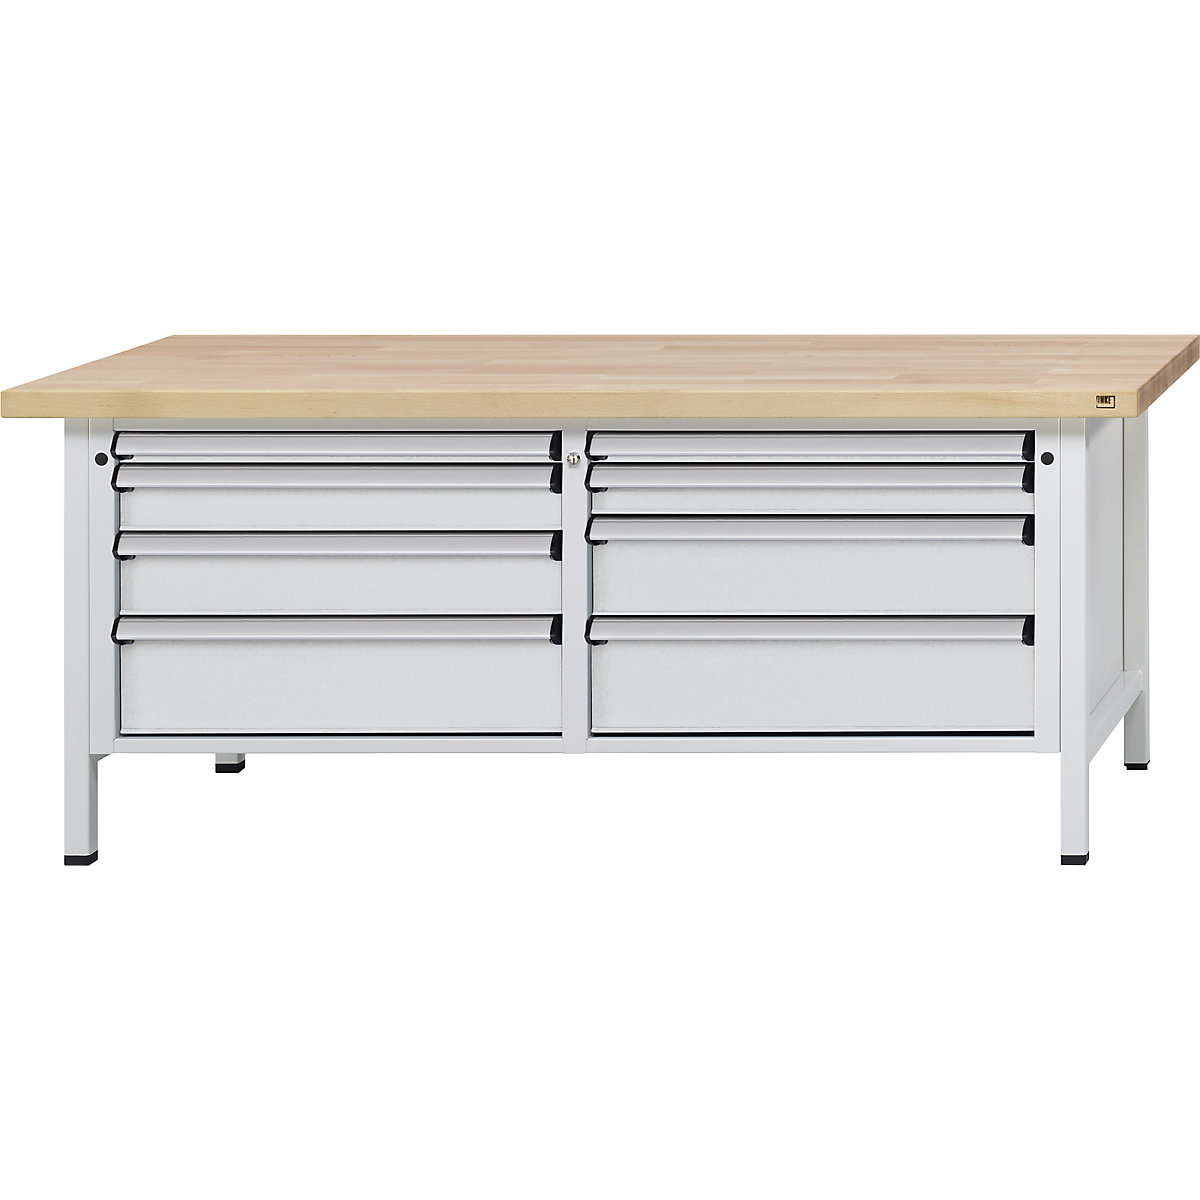 Workbench with XL/XXL drawers, frame construction – ANKE, width 2000 mm, 8 drawers, solid beech worktop, front in light grey-12